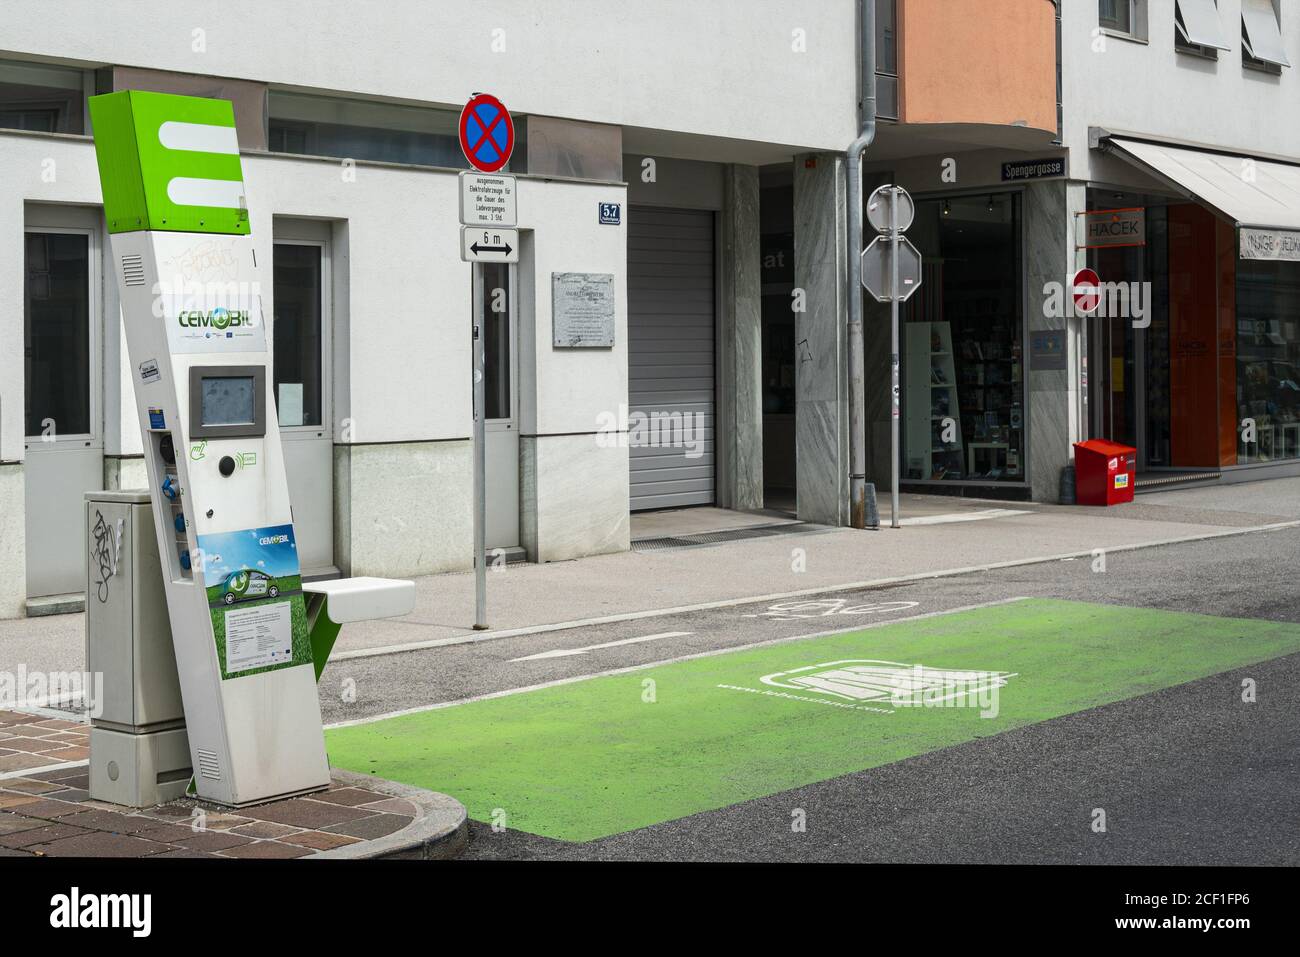 Klagenfurt, Austria. August 16, 2020. An electric vehicle charging station in a street in the city center. Stock Photo